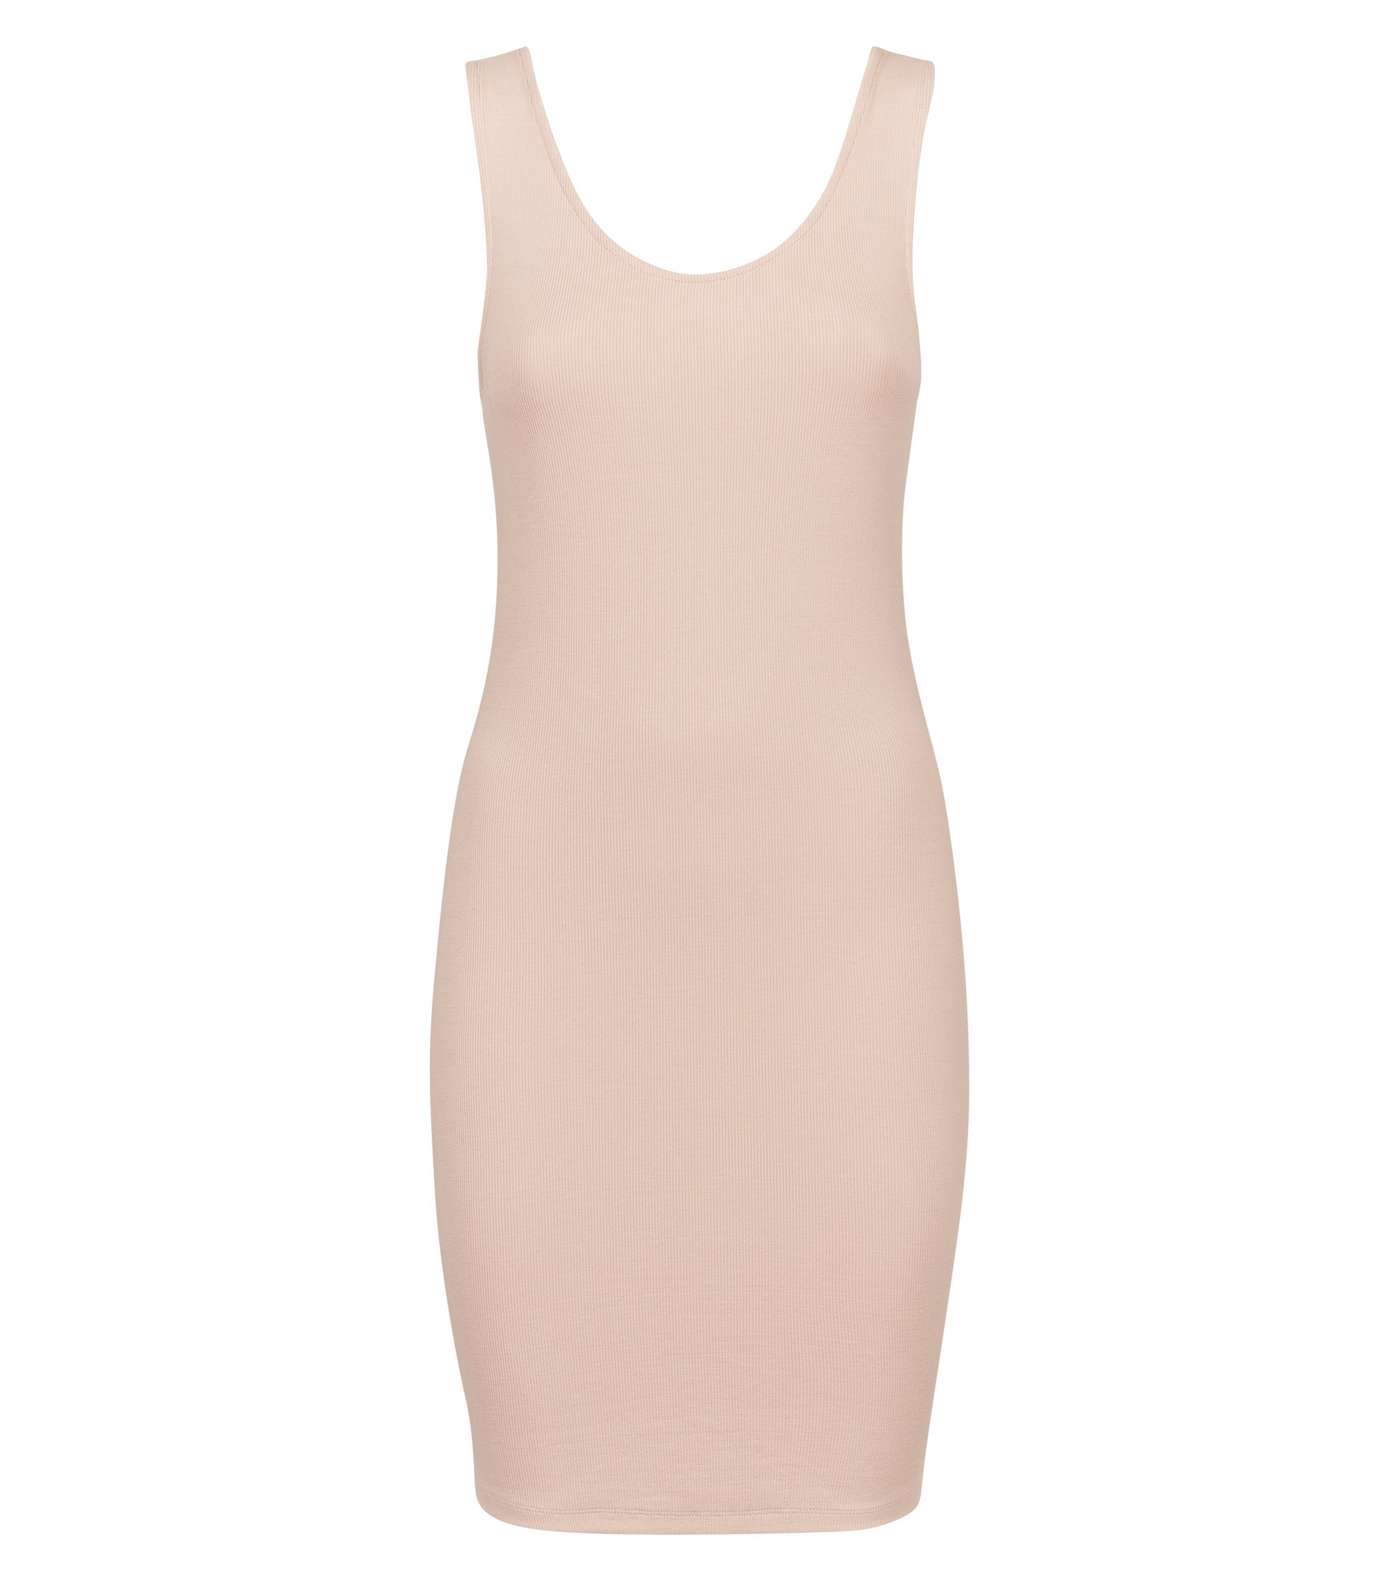 Pale Pink Ribbed Sleeveless Bodycon Dress Image 4